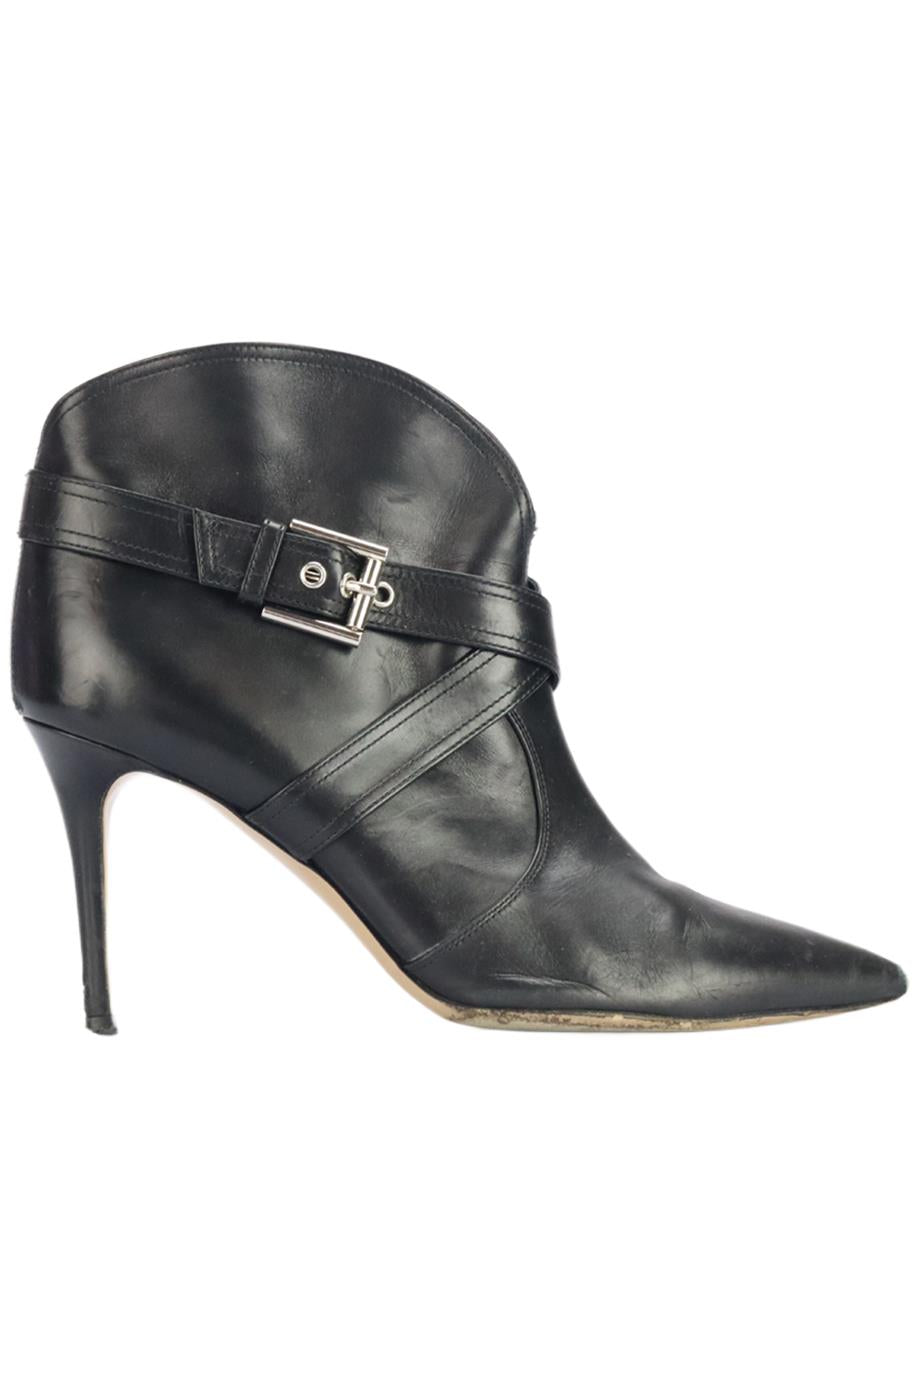 GIANVITO ROSSI LEATHER ANKLE BOOTS EU 40 UK 7 US 10